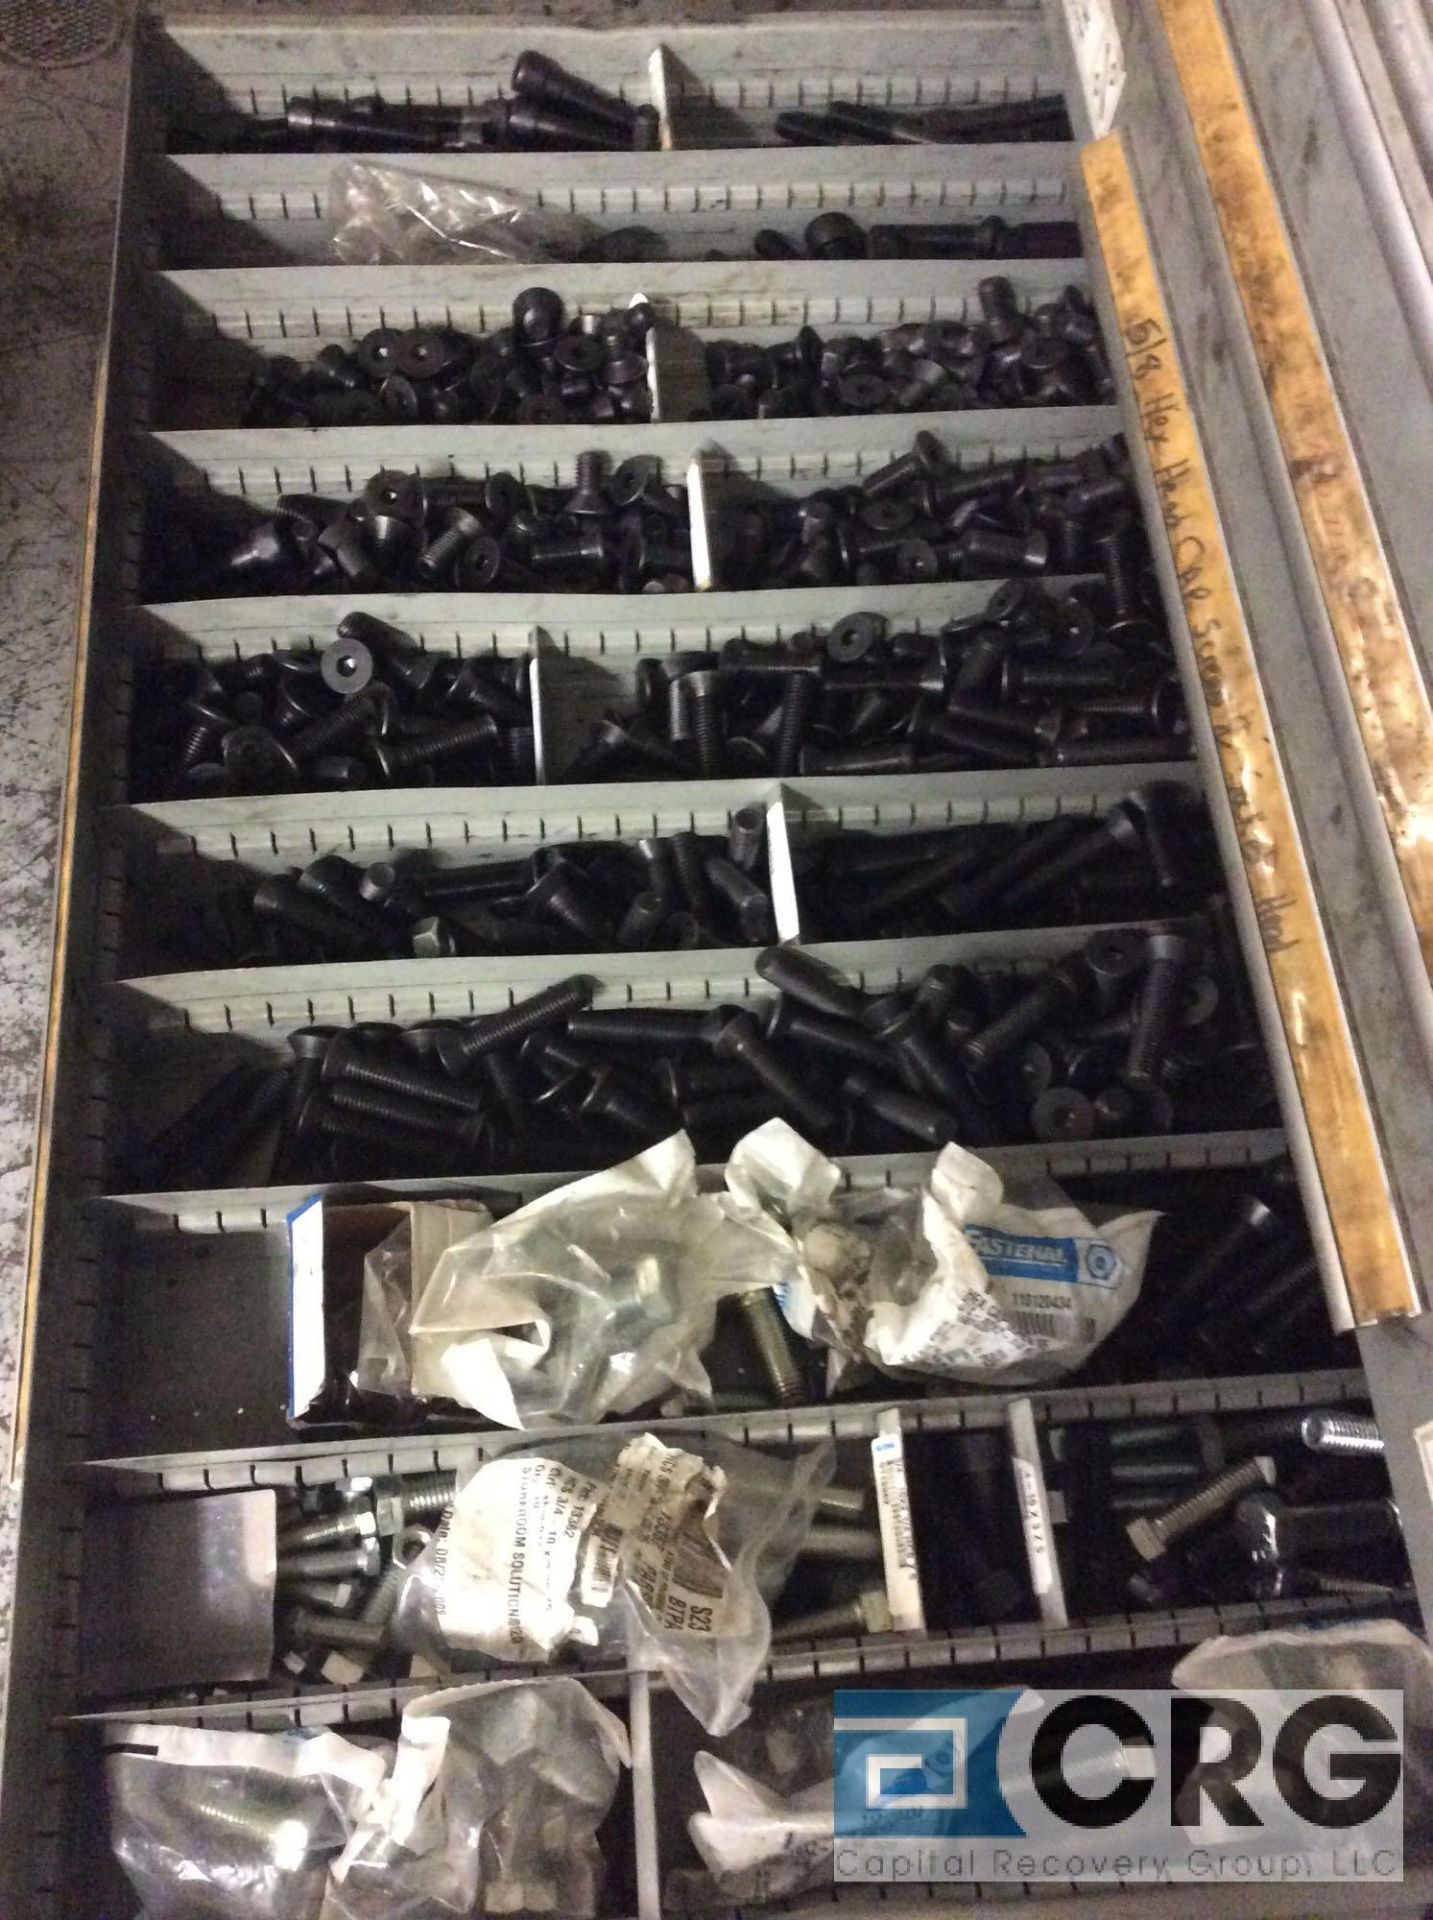 Rack Engineering Co, Nu Era, 12 drawer, 4 foot wide x 2 foot deep parts cabinet with contents of - Image 9 of 20